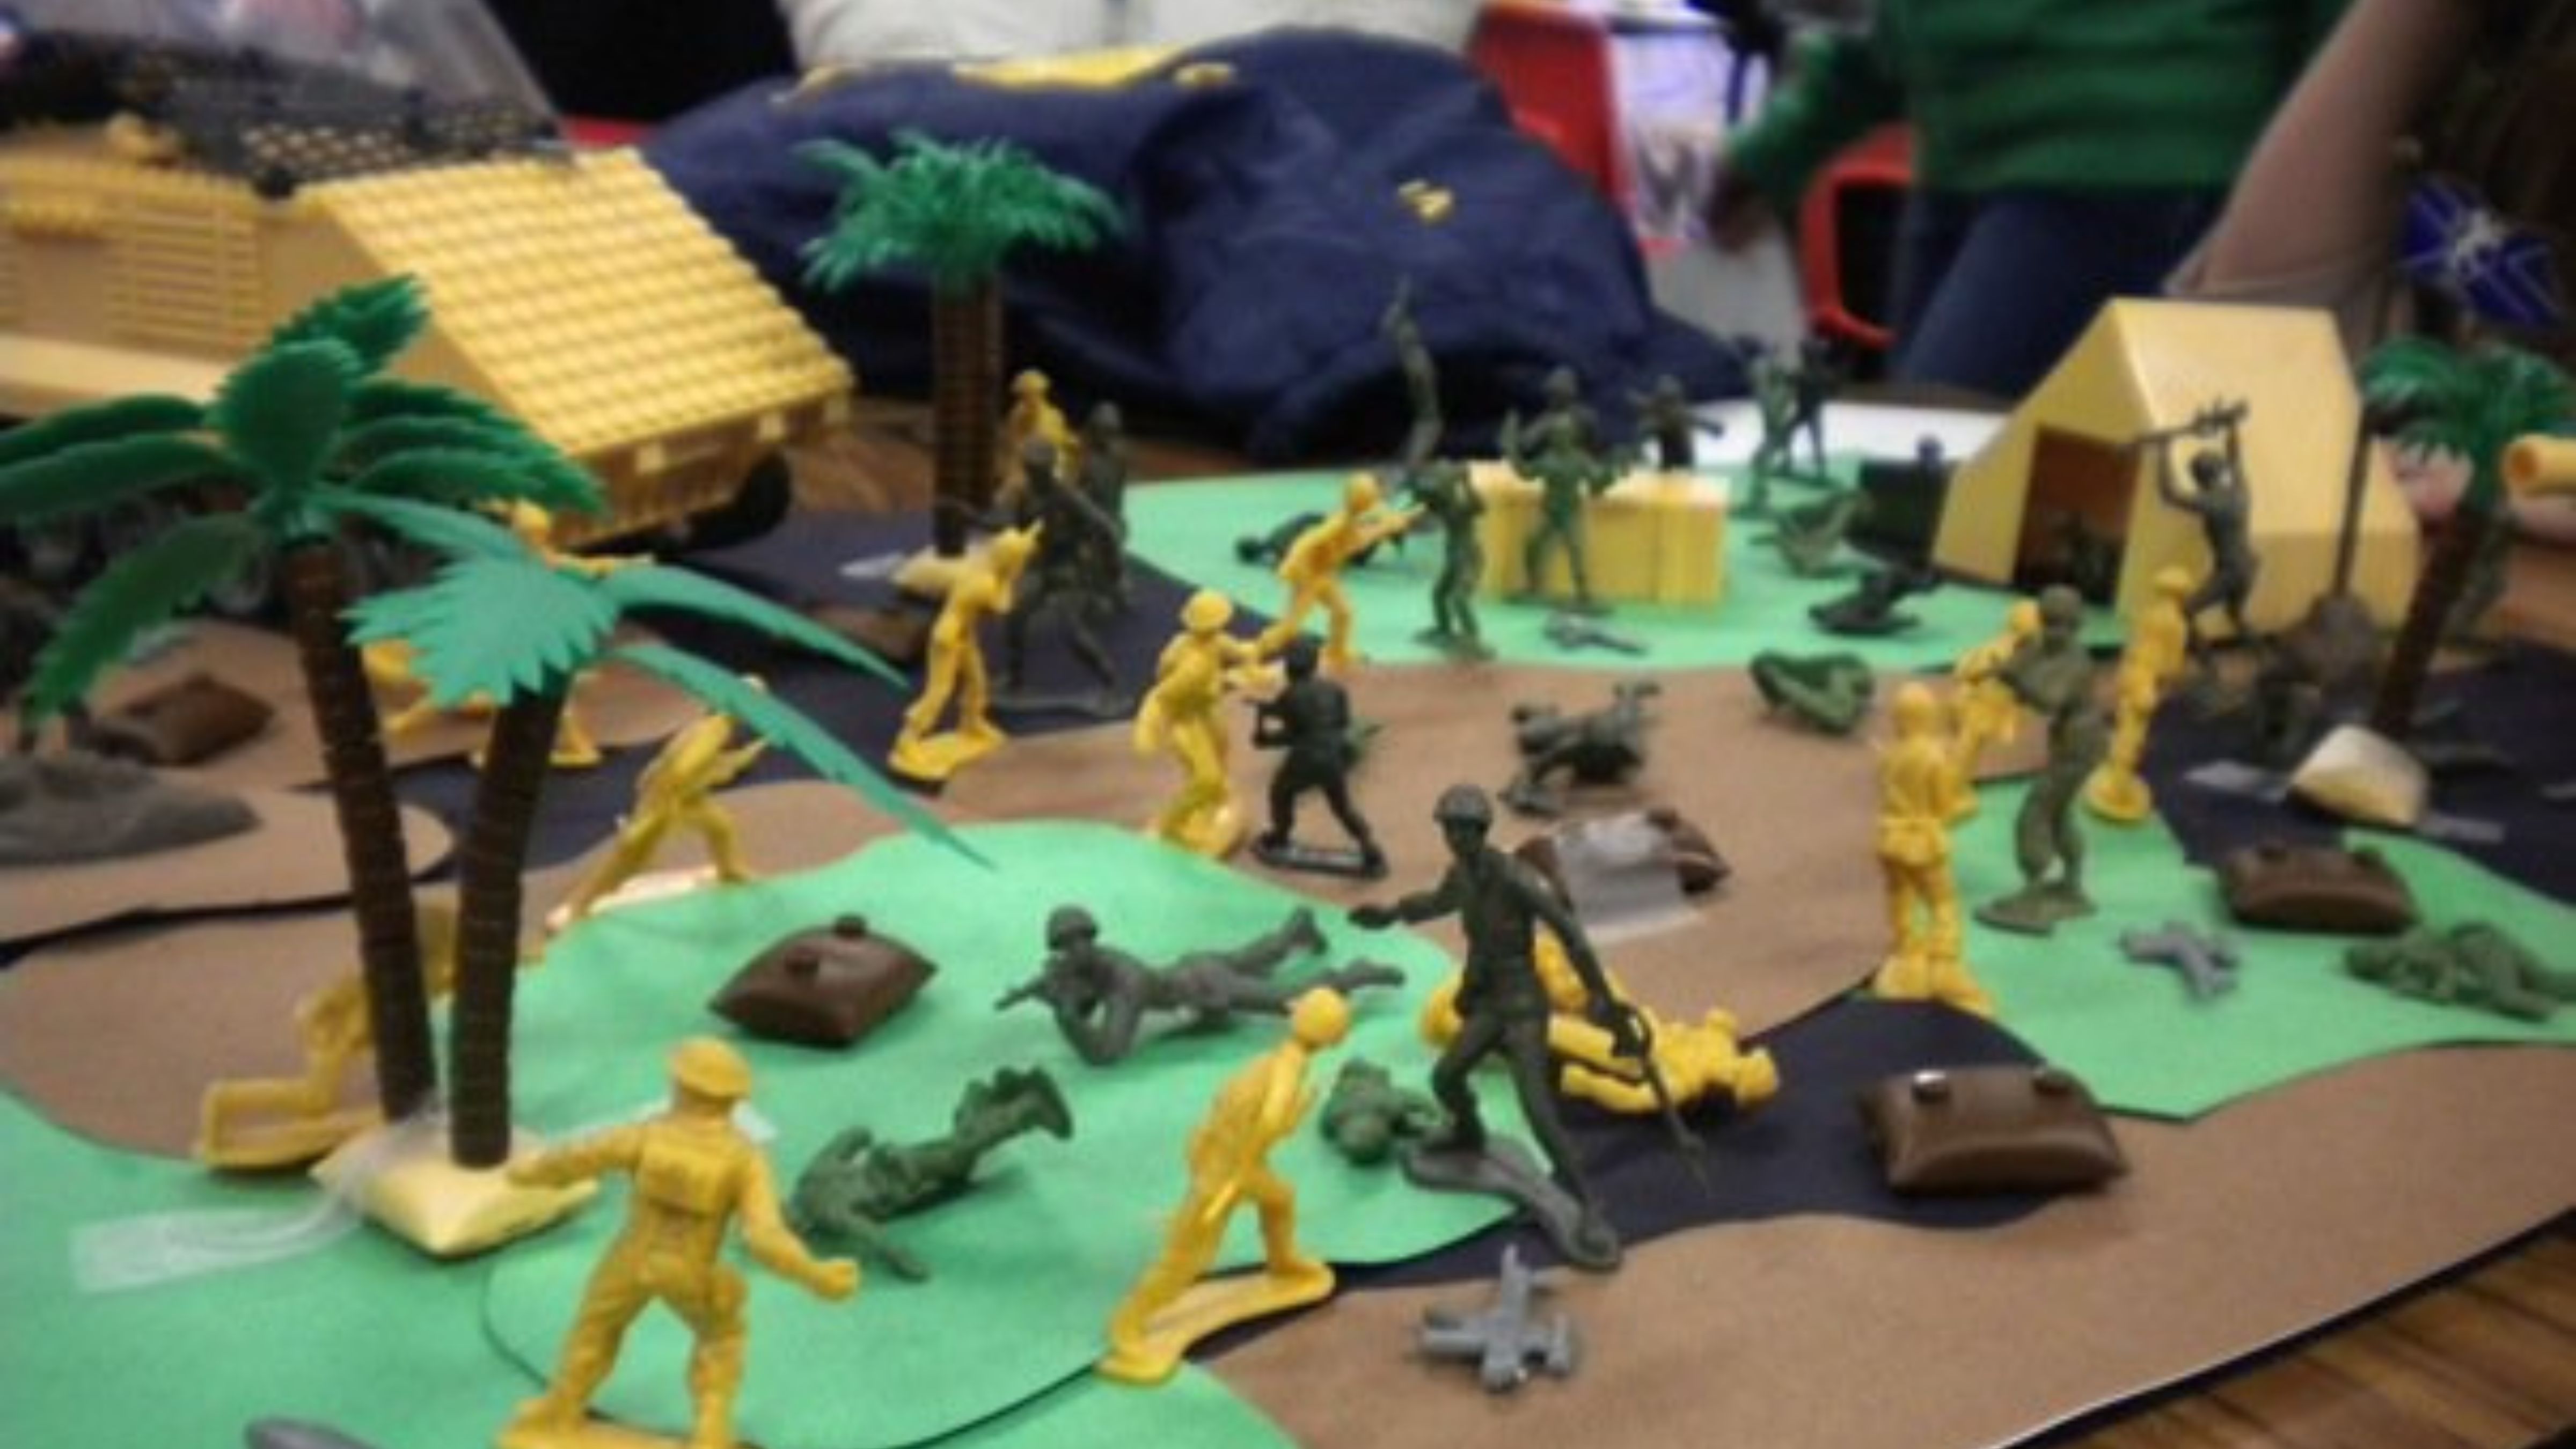 School diarama with green army men on a table decorated to look like a battle field. 